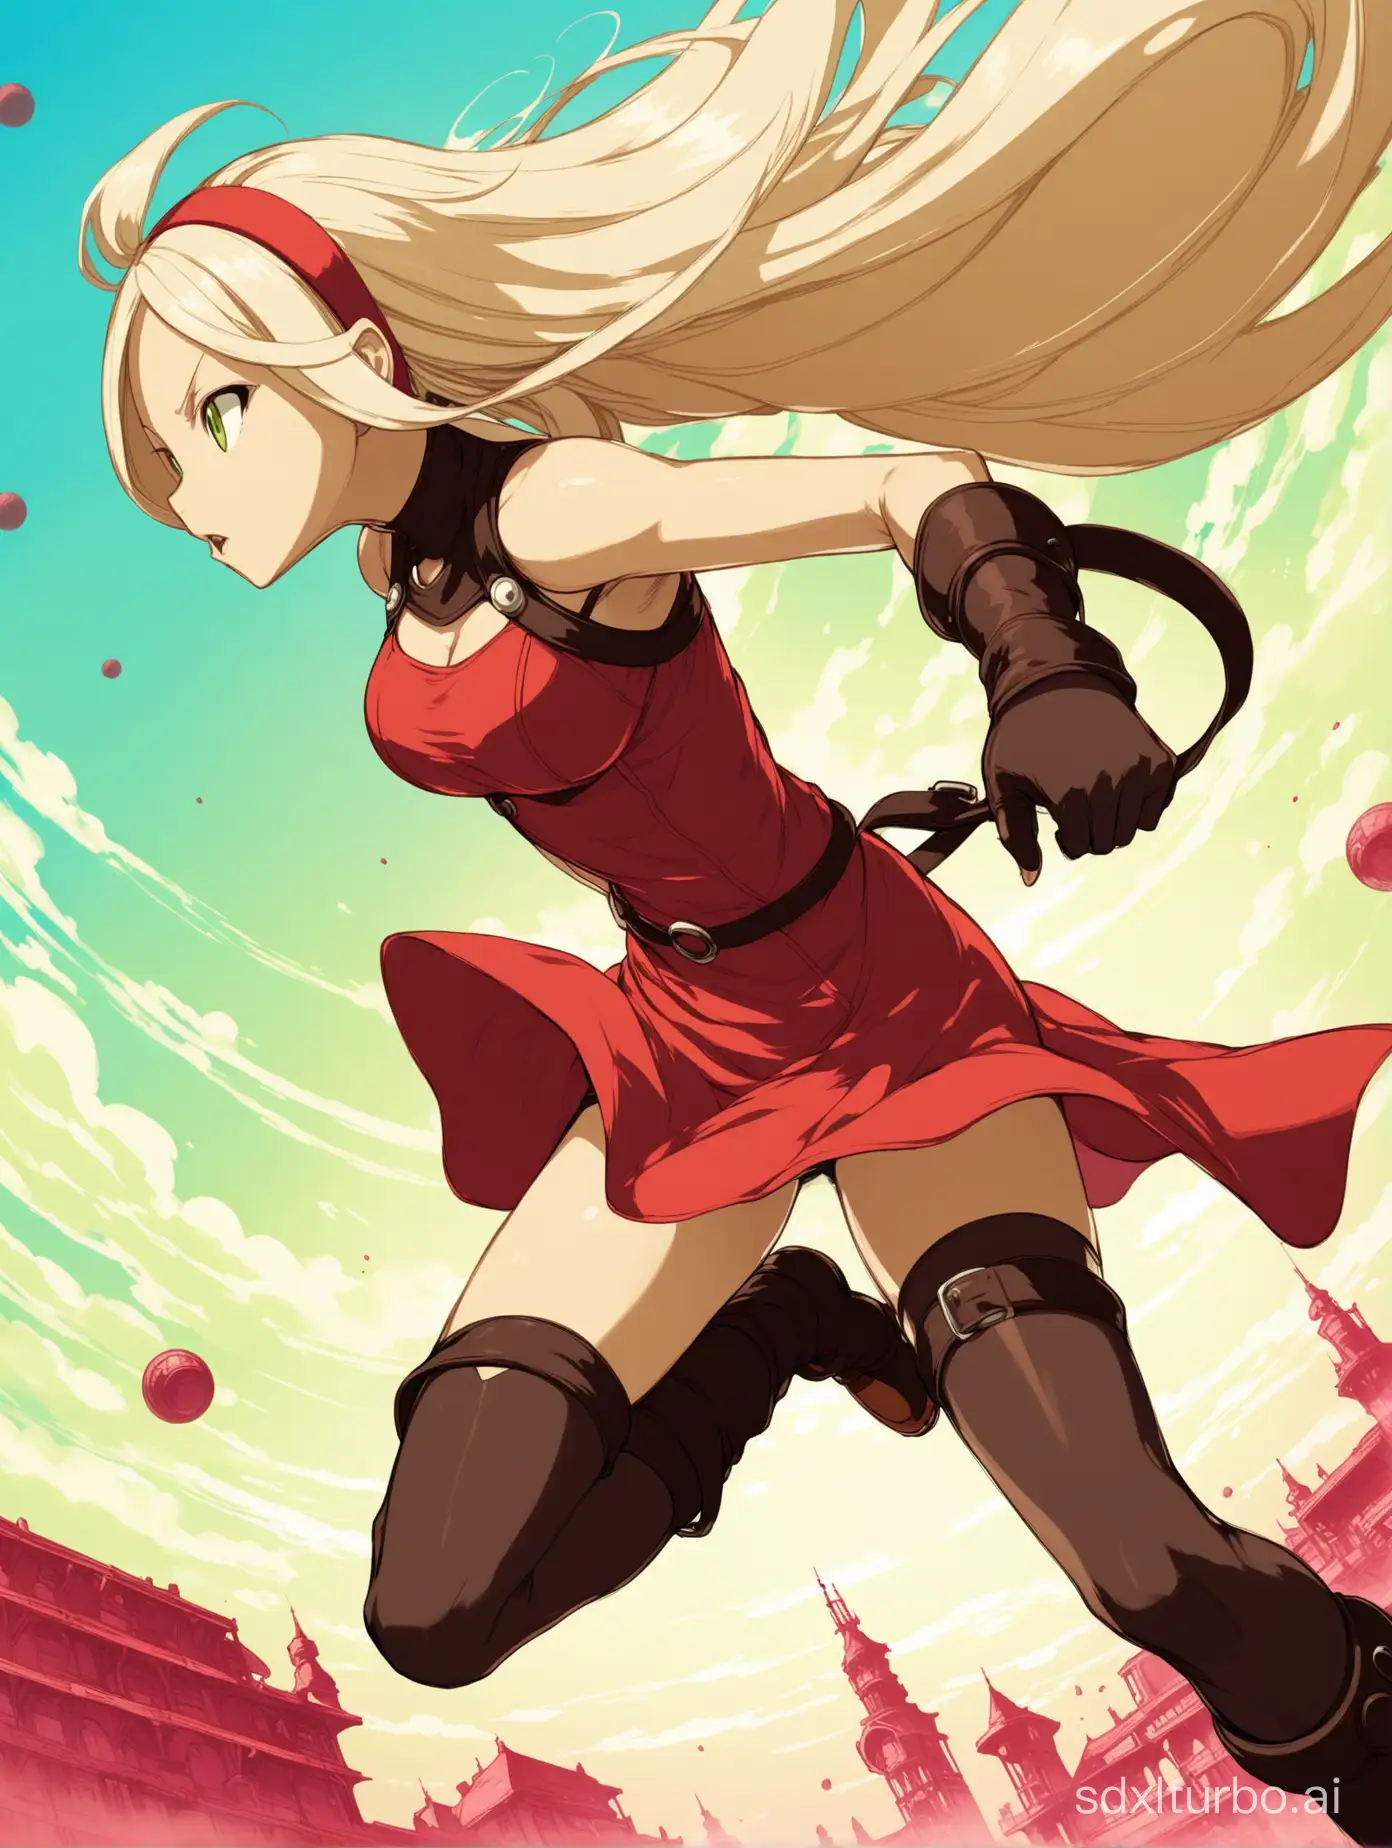 Kat-from-Gravity-Rush-in-Dynamic-Red-Dress-and-Hairband-Action-Pose